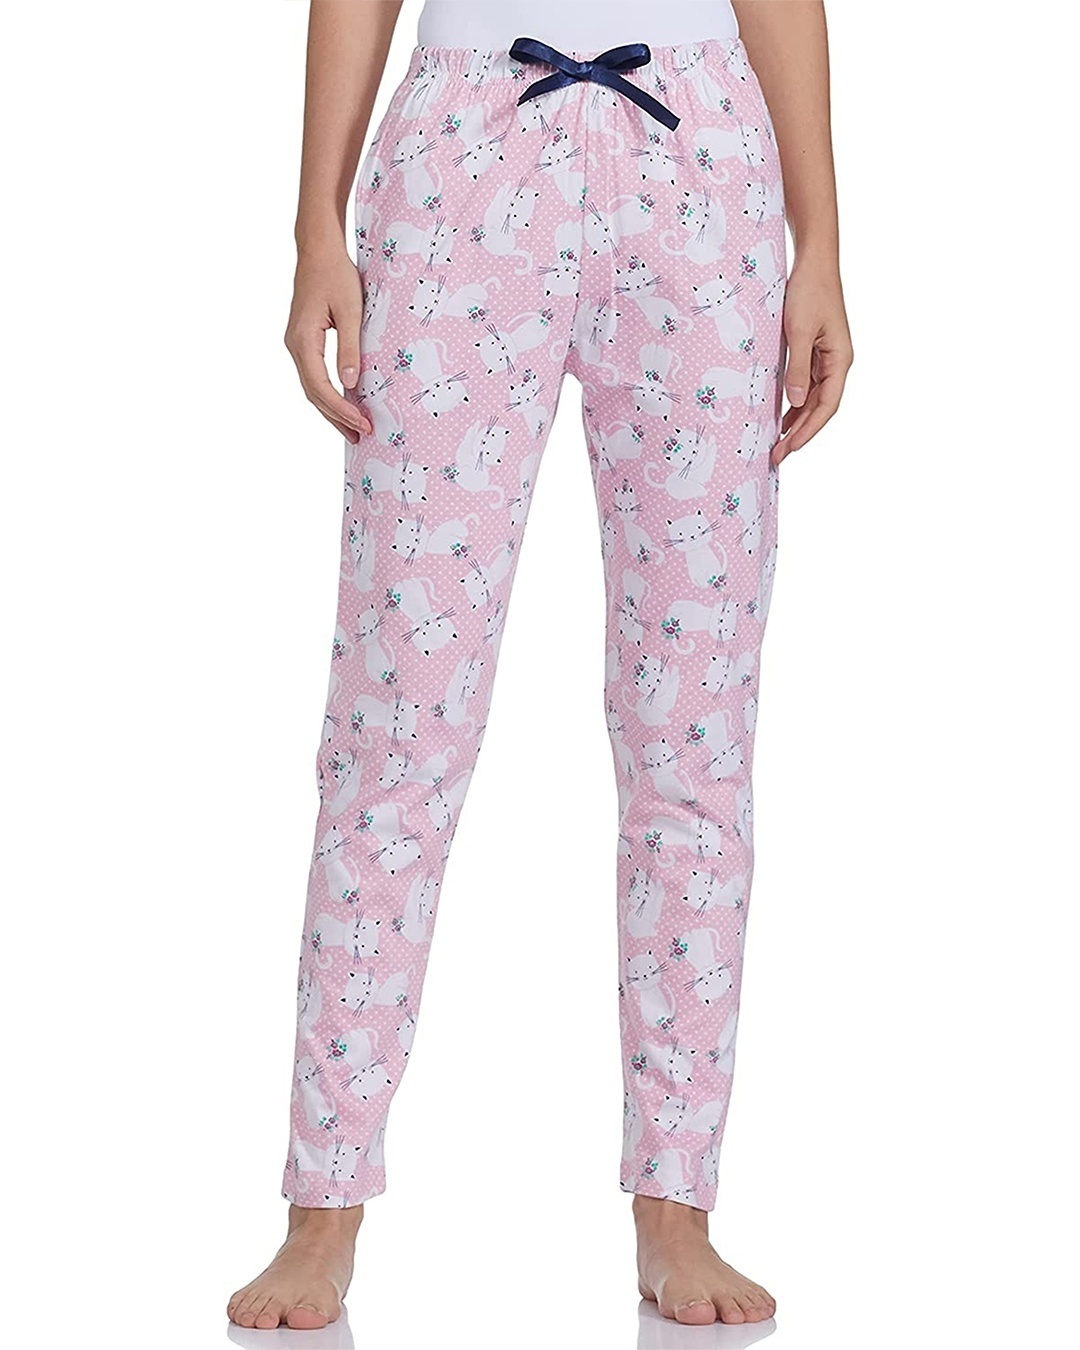 Shop Women's Pink All Over Cat Printed Cotton Pyjamas-Front